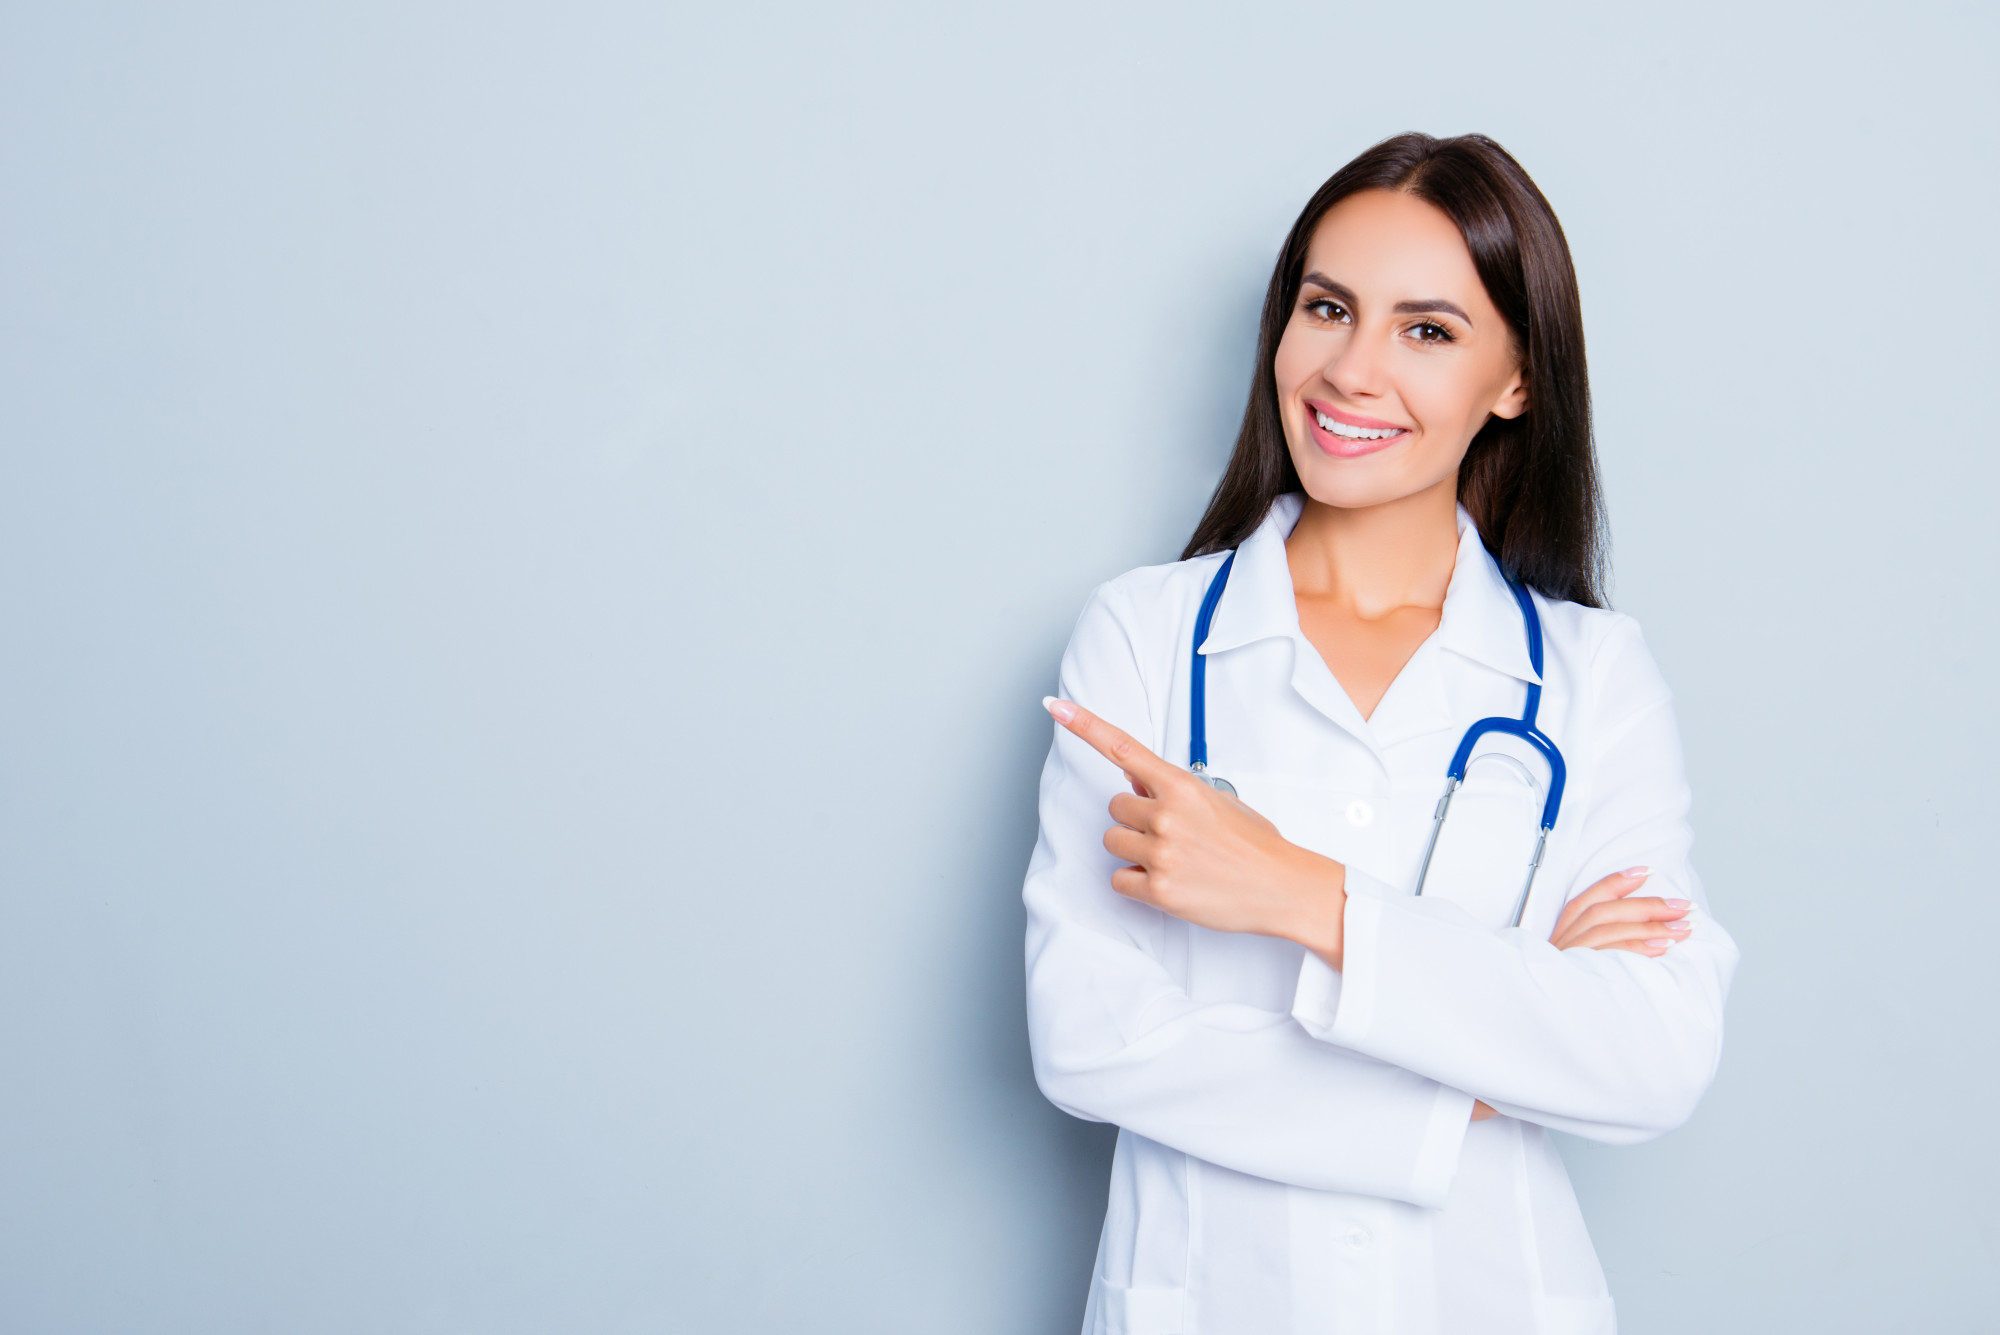 Only Visit the Best: How to Find a Doctor That Perfectly Suits Your Needs